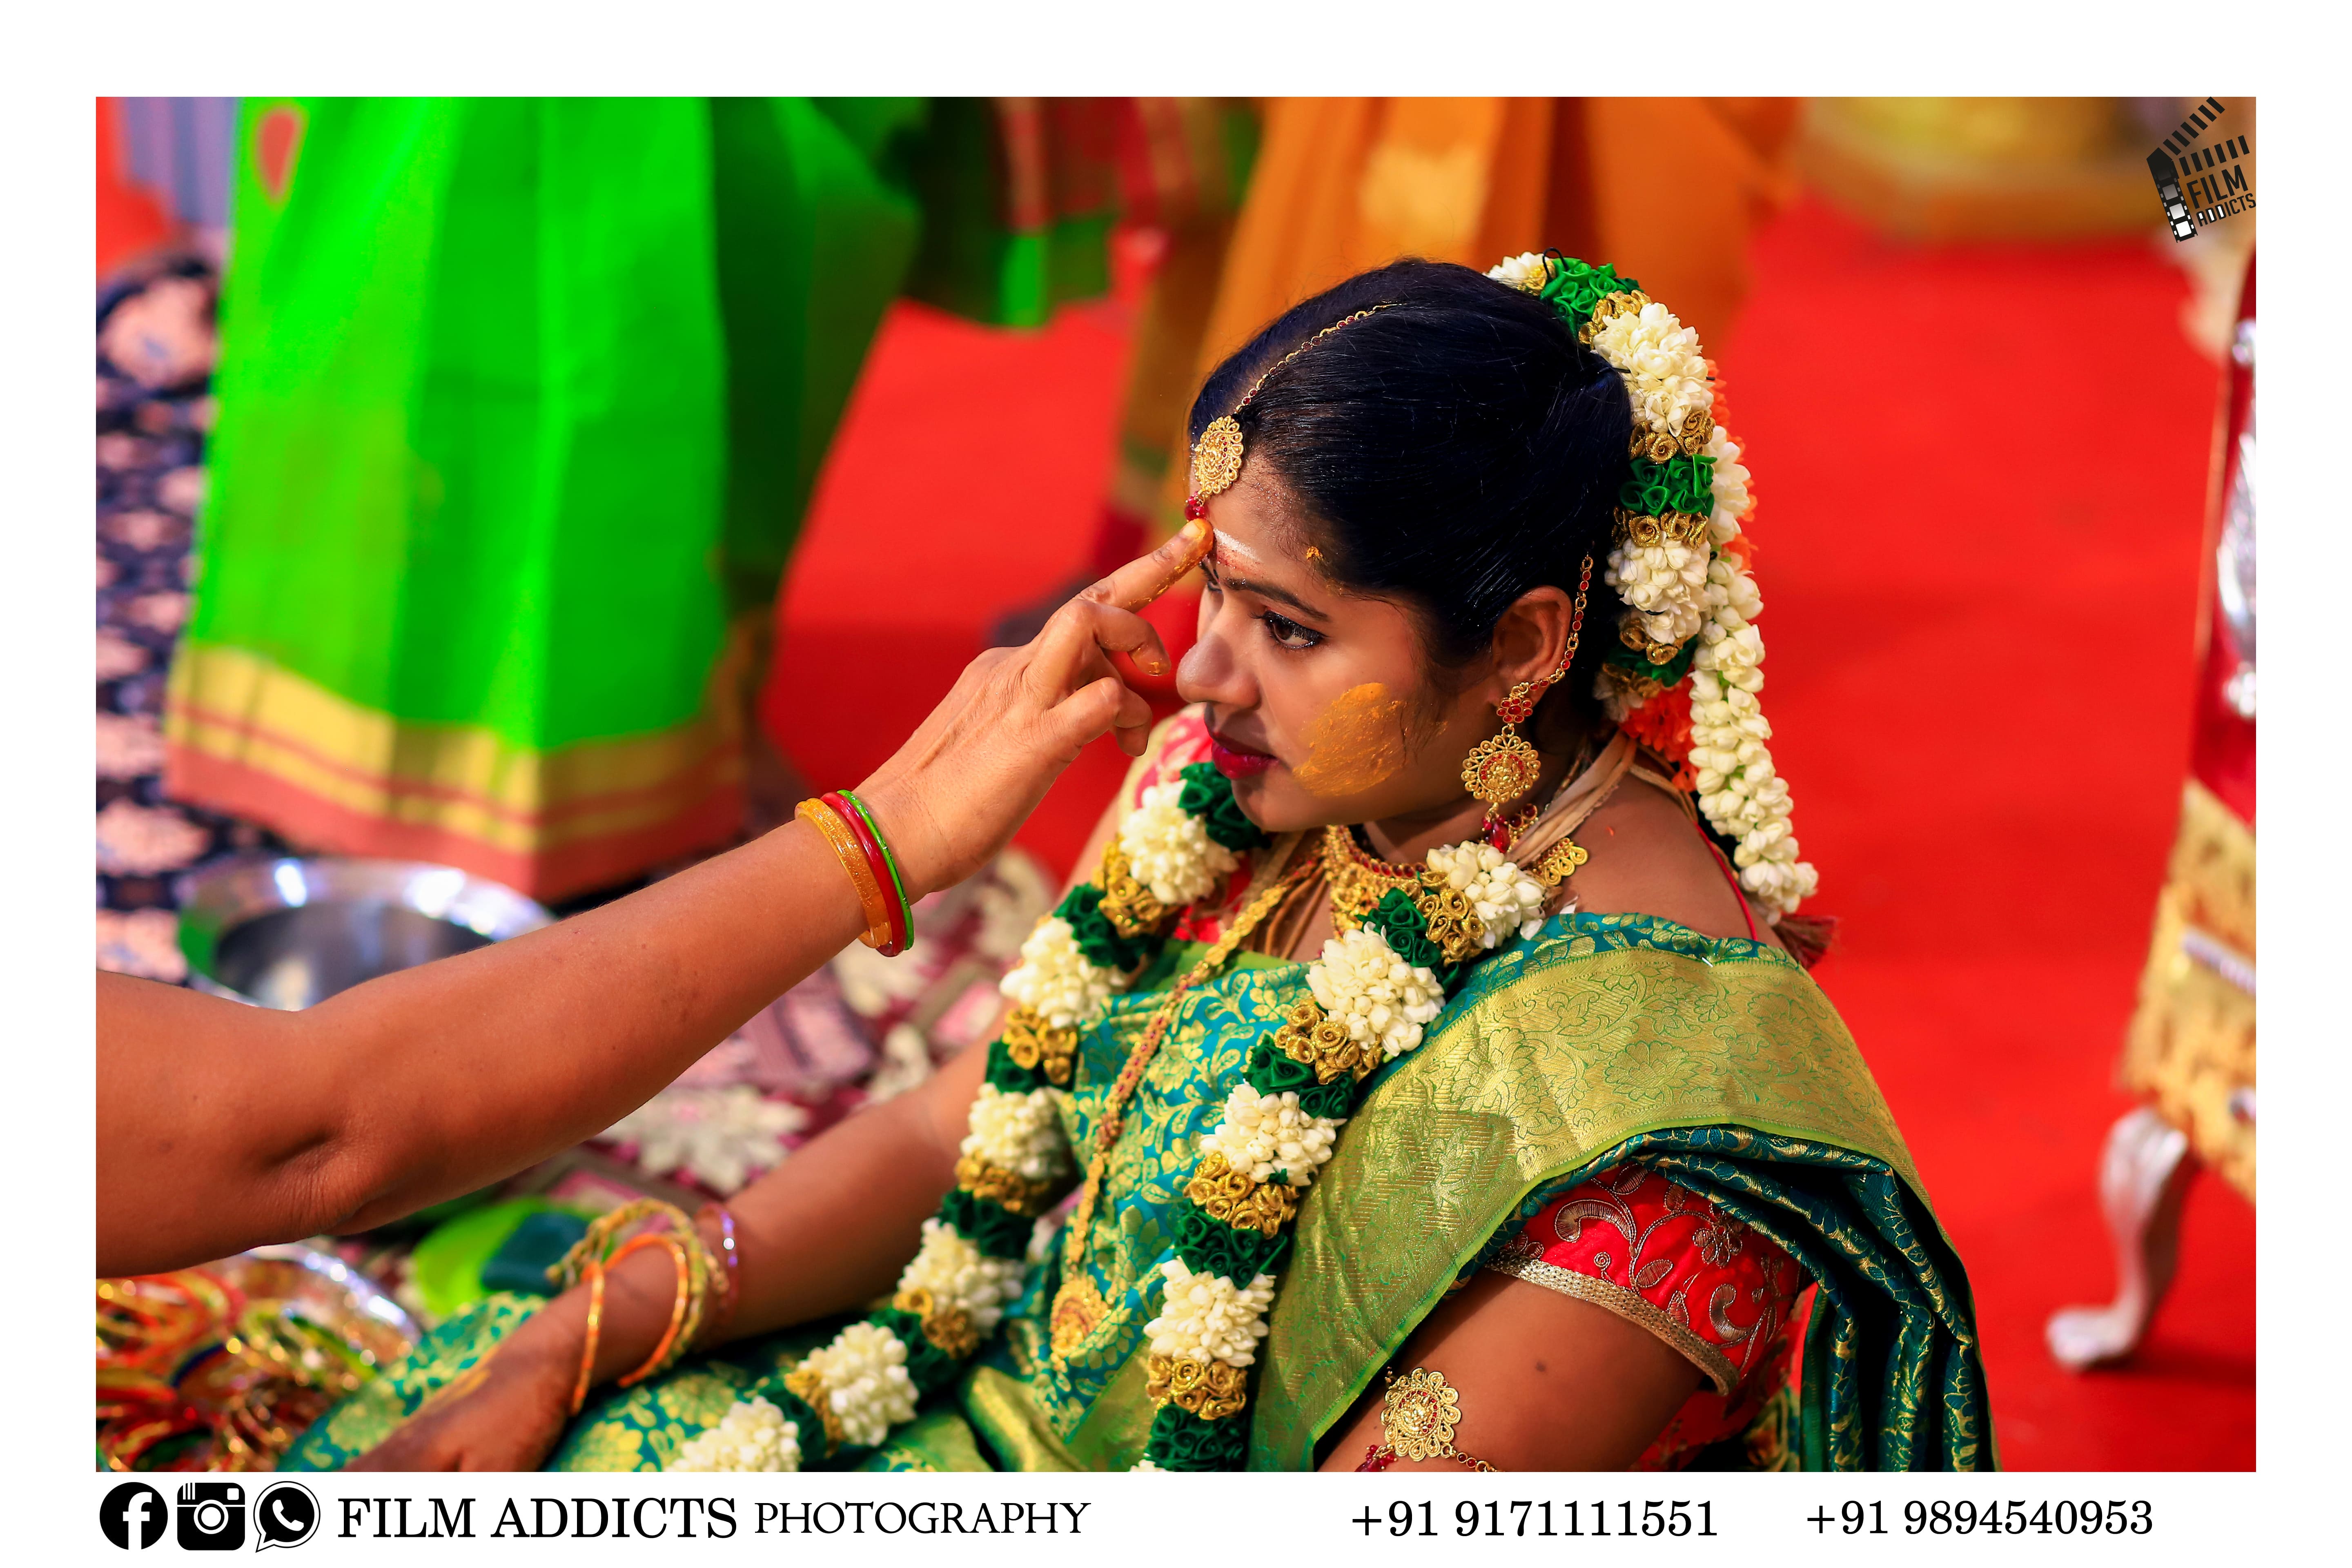 best-candid-photographers-in-Sivakasi,Candid-photography-in-Sivakasi,best-wedding -photography-in-Sivakasi,Best-candid-photography-in-Sivakasi,Best-candid-photographer,candid-photographer-in-Sivakasi,drone-photographer-in-Sivakasi,helicam-photographer-in-Sivakasi,candid-wedding-photographers-in-Sivakasi,photographers-in-Sivakasi,professional-wedding-photographers-in-Sivakasi,top-wedding-filmmakers-in-Sivakasi,wedding-cinematographers-in-Sivakasi,wedding-cinimatography-in-Sivakasi,wedding-photographers-in-Sivakasi,wedding-teaser-in-Sivakasi,asian-wedding-photography-in-Sivakasi,best-candid-photographers-in-Sivakasi,best-candid-videographers-in-Sivakasi,best-photographers-in-Sivakasi,best-wedding-photographers-in-Sivakasi,best-nadar-wedding-photography-in-Sivakasi,candid-photographers-in-Sivakasi,destination-wedding-photographers-in-Sivakasi,fashion-photographers-in-Sivakasi, Sivakasi-famous-stage-decorations